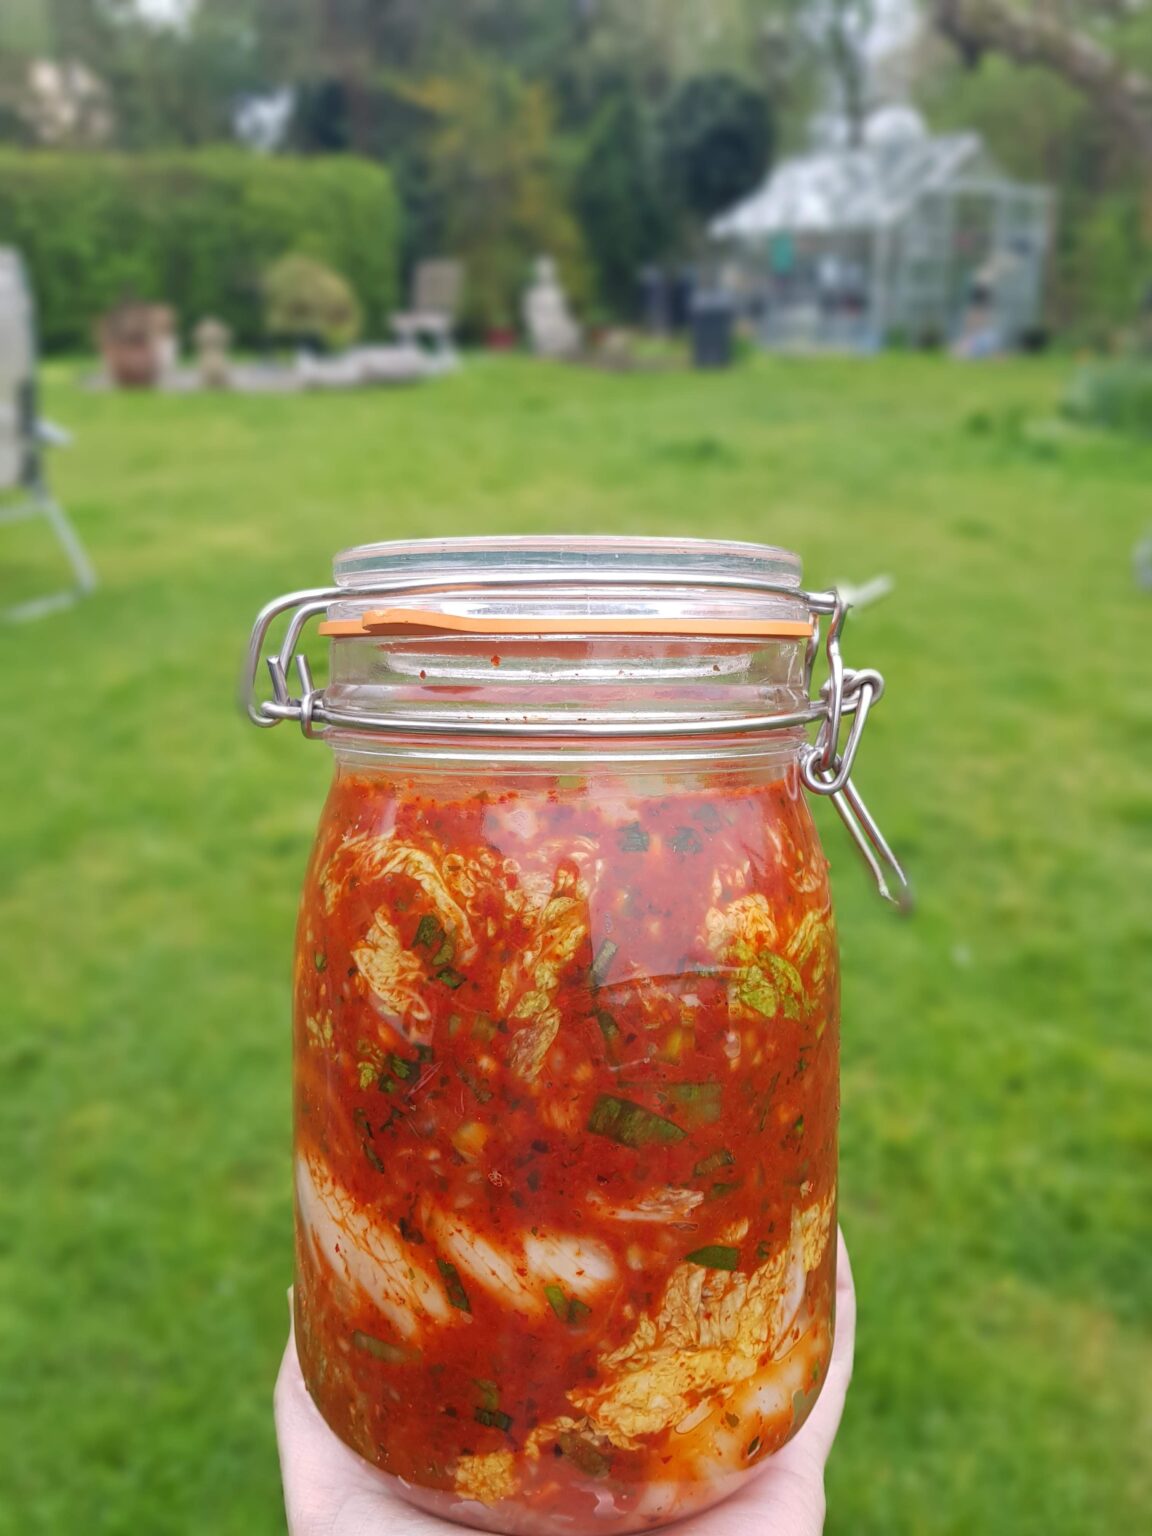 A jar of fermented kimchi (probiotics) with a green garden in the background